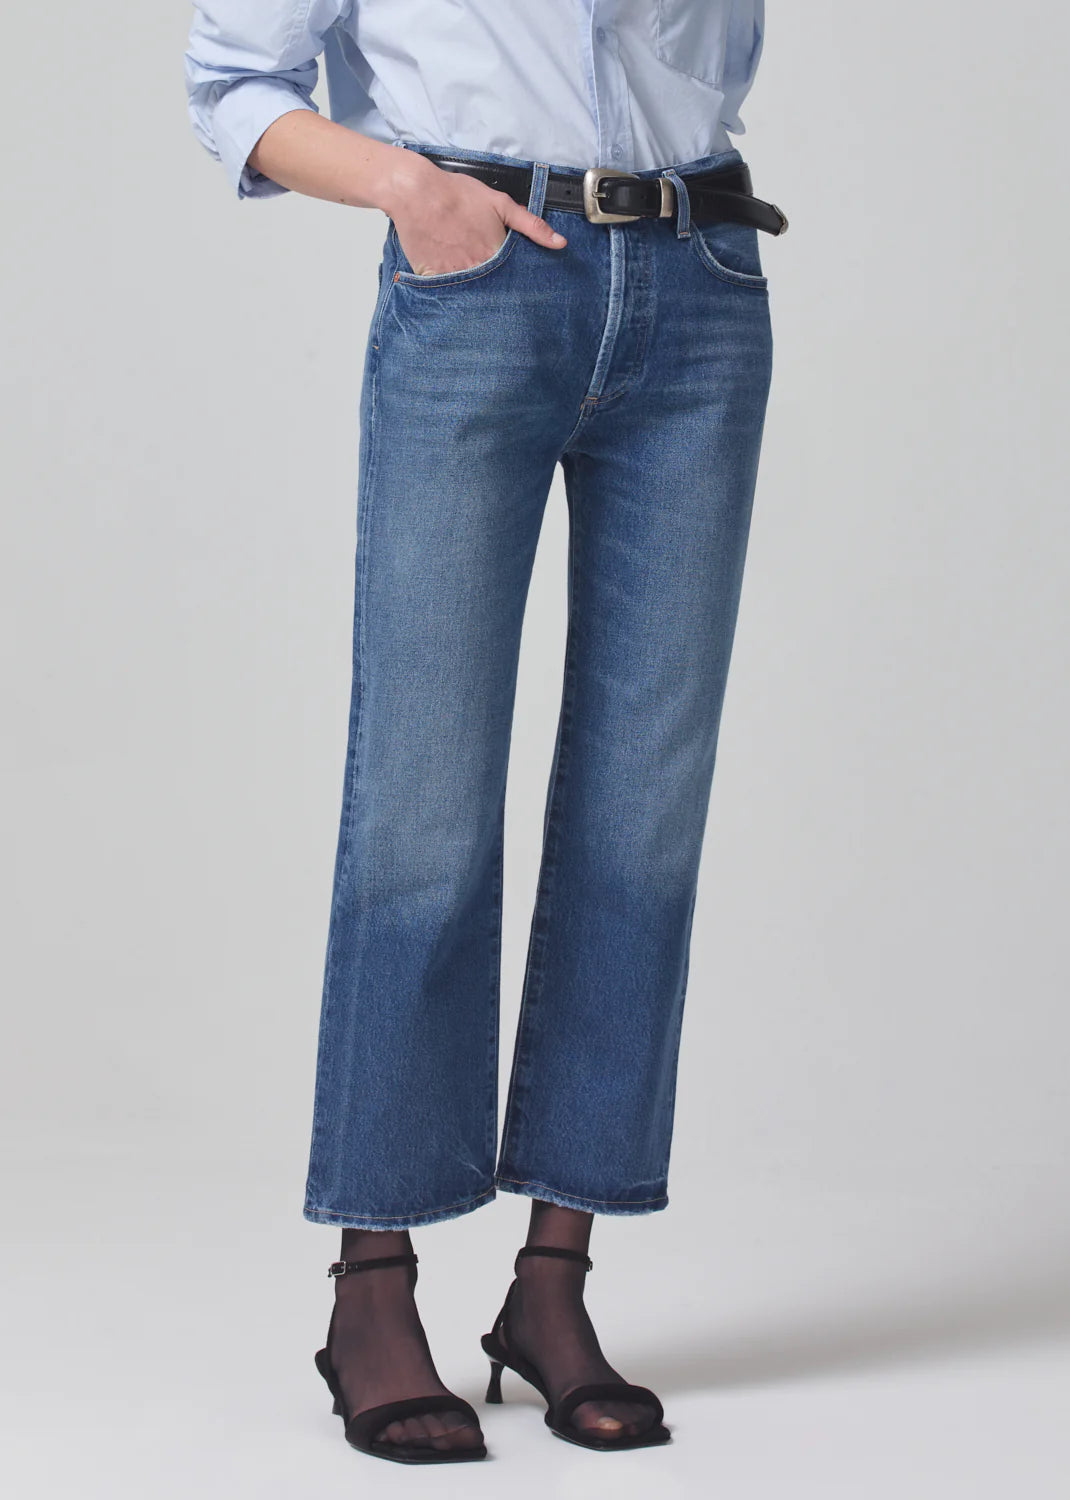 Emery Crop Relaxed Jean in Oasis